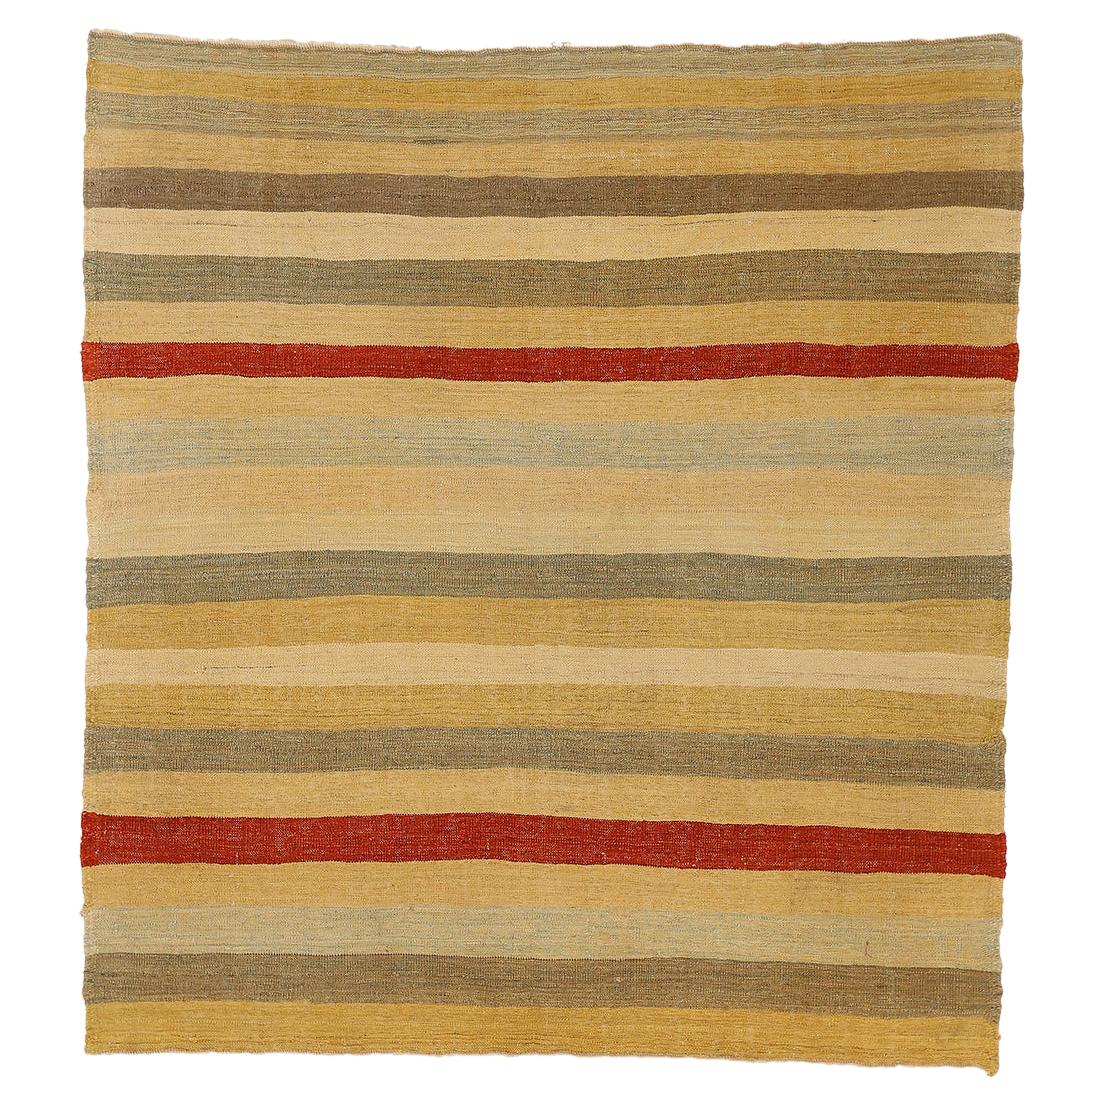 New Turkish Kilim Rug with a Field of Mixed Red & Brown Stripes For Sale